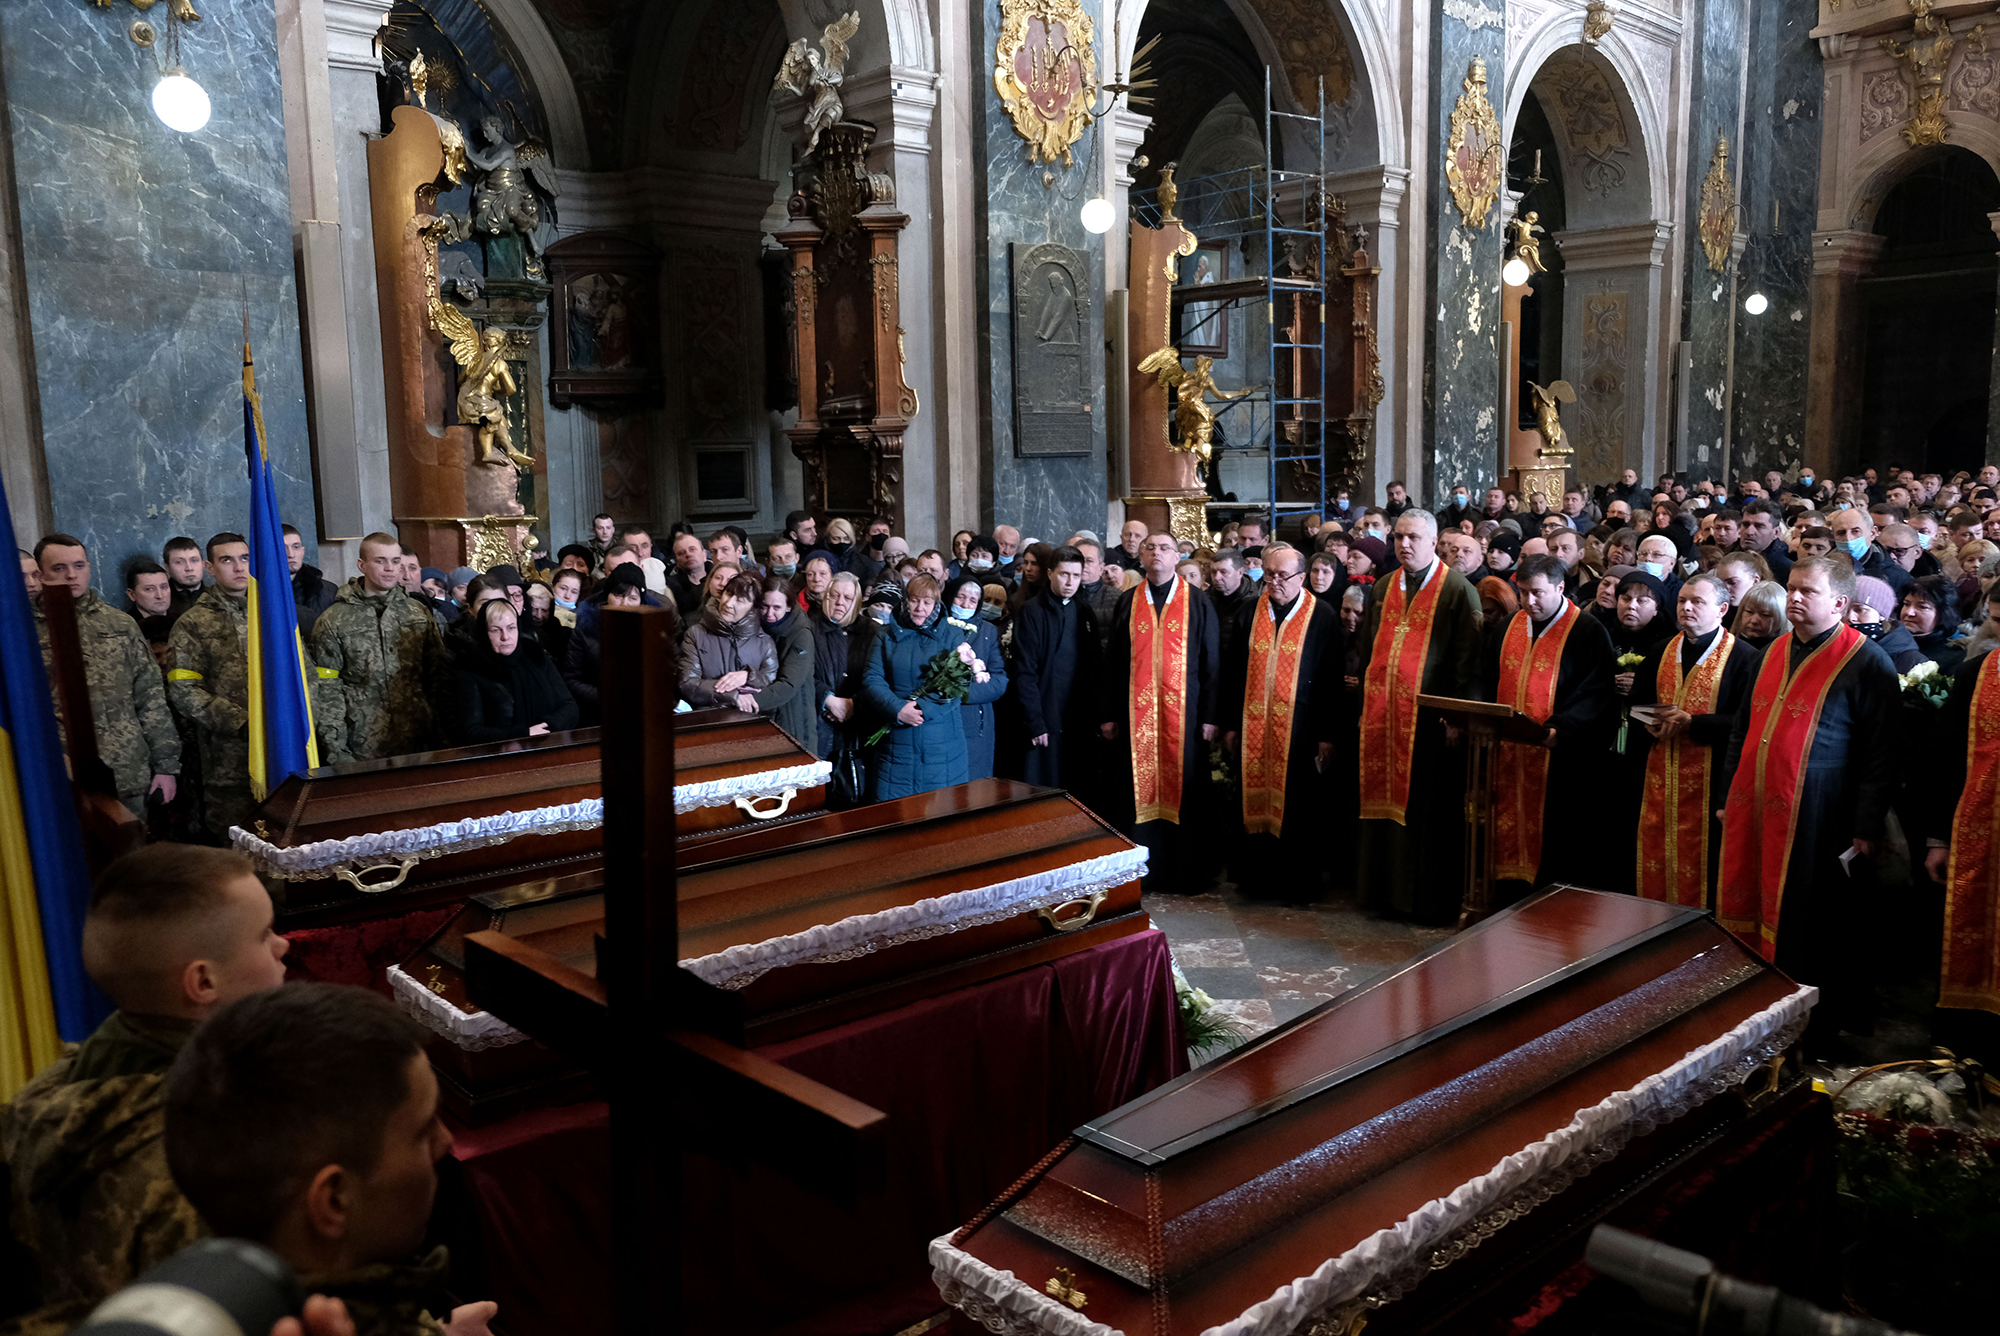 Senior Private Andrii Stafanyshyn, 39, Senior Lieutenant Taras Didukh, 25, and Sergeant Dmytro Kabakov, 58, were laid to rest during a service at Saints Peter and Paul Garrysin Church in Lviv, Ukraine, Friday, March 11.